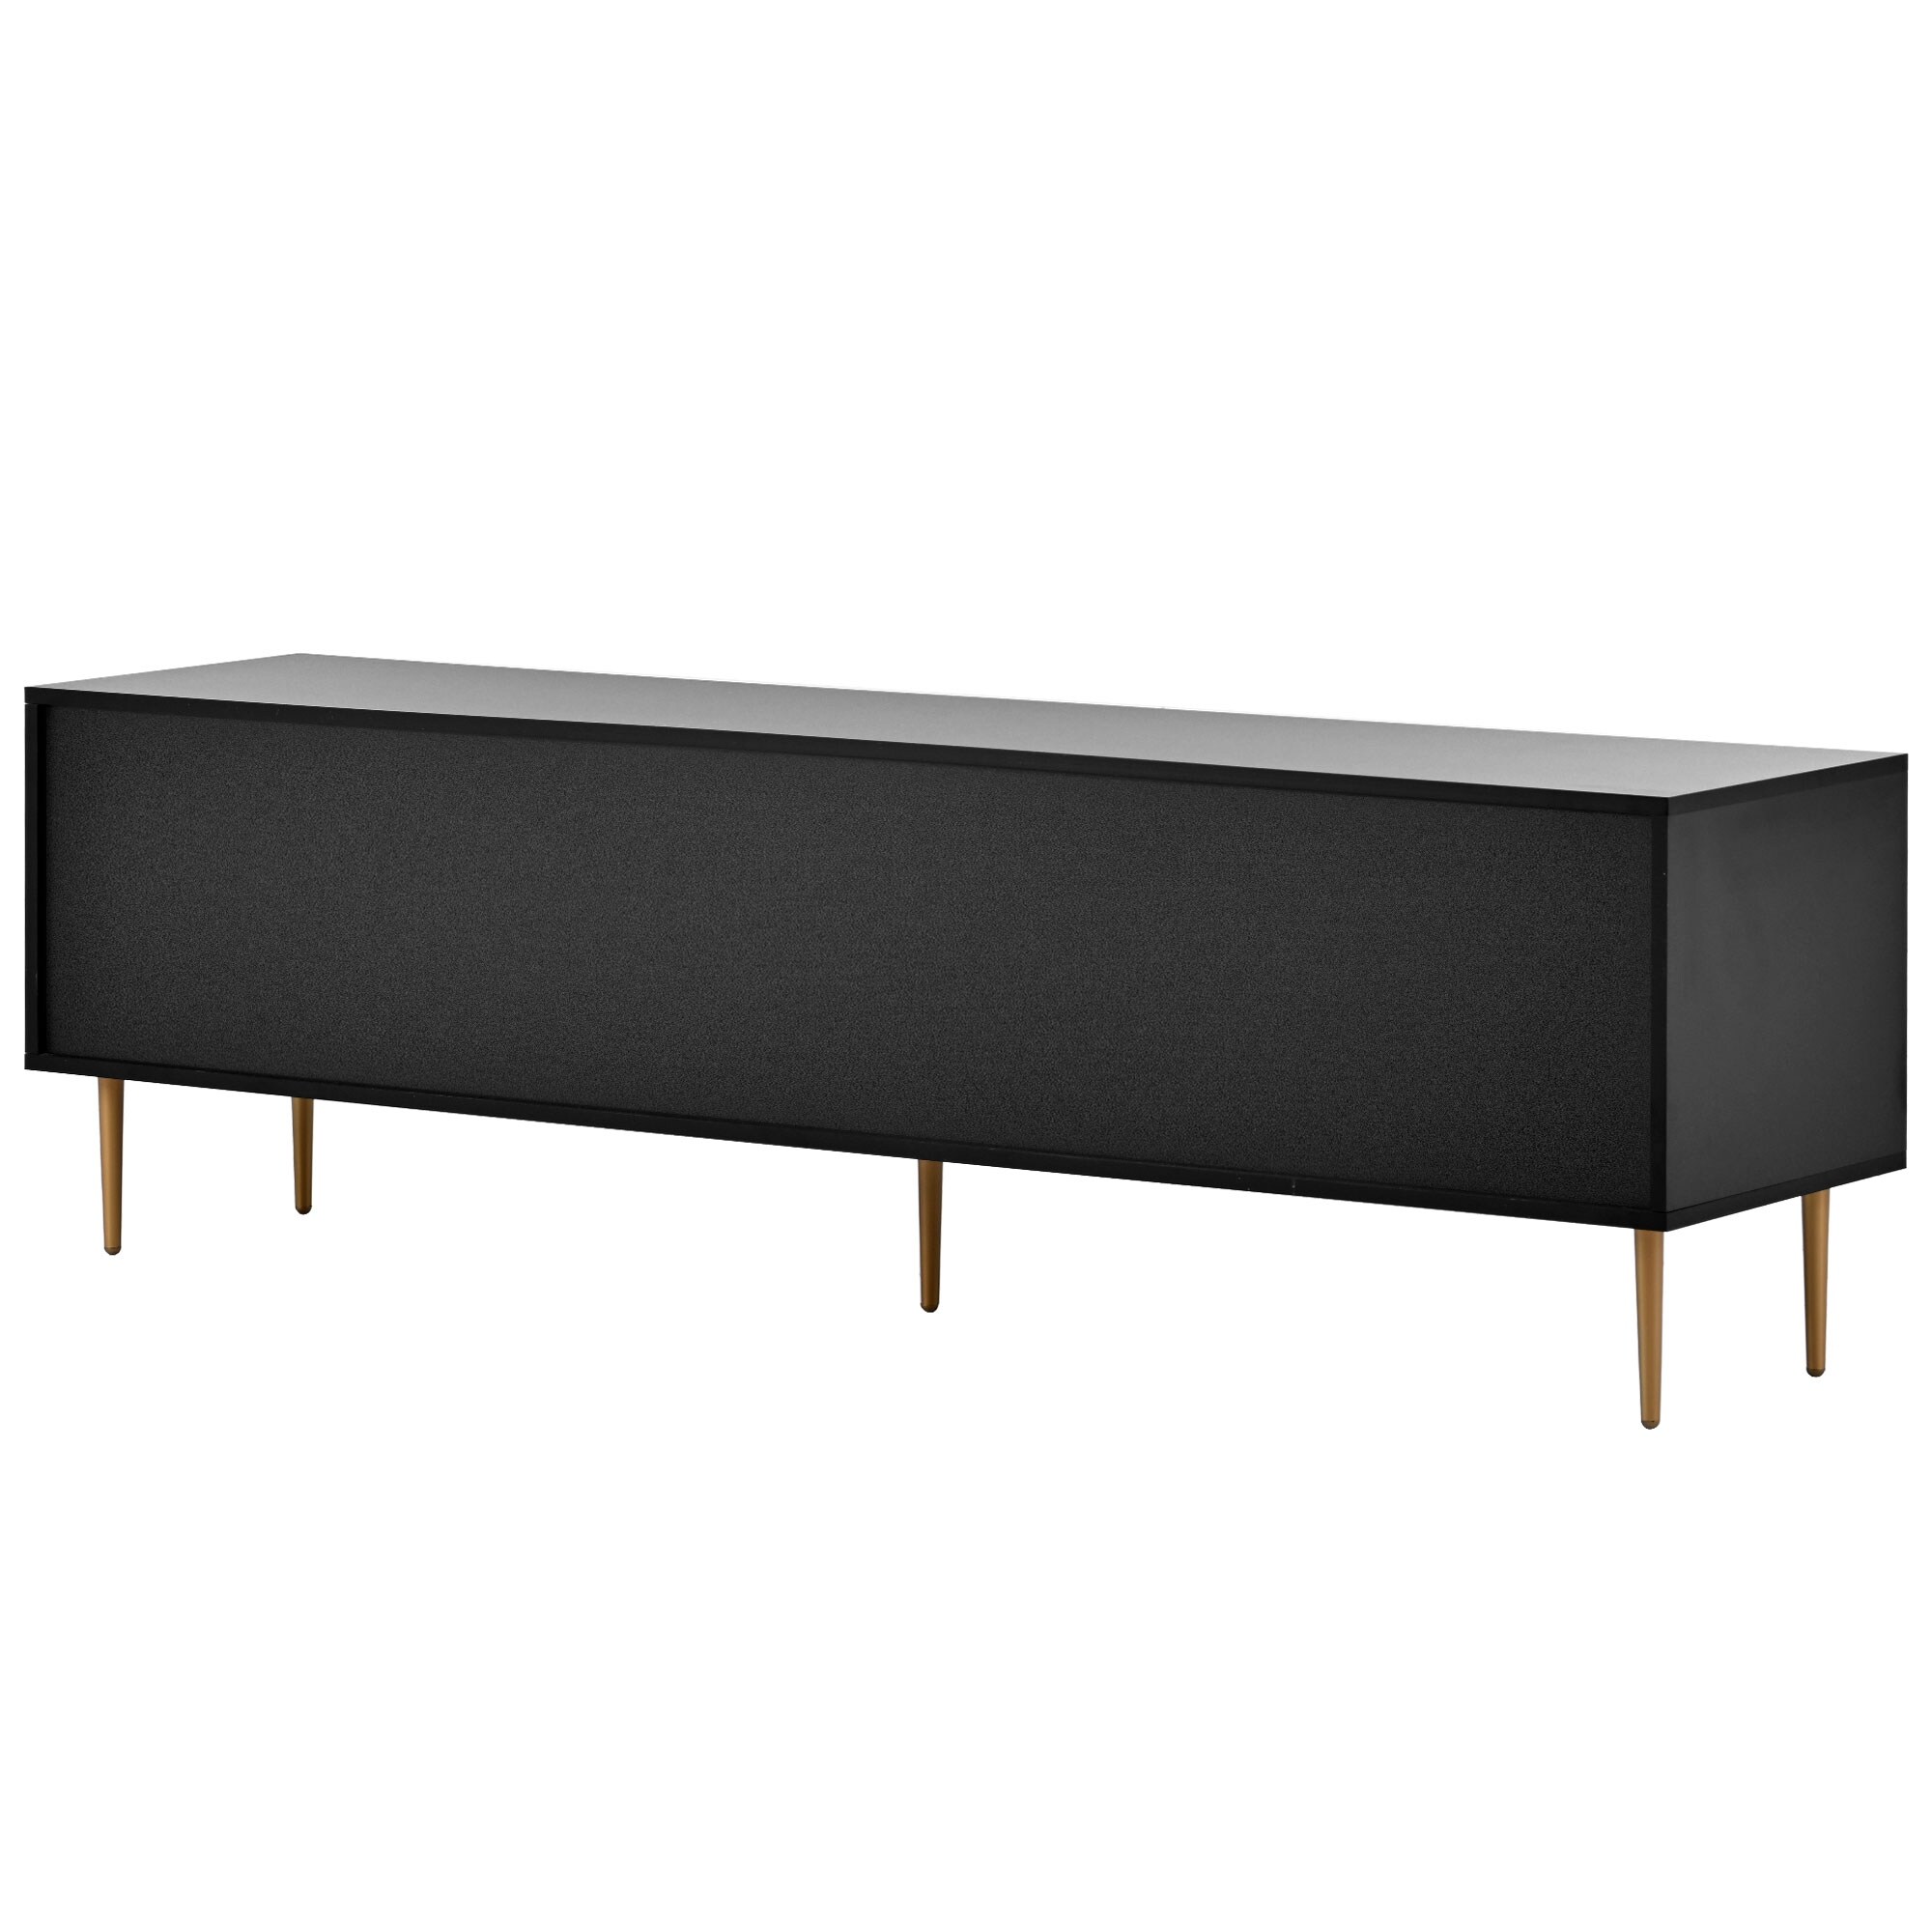 Modern TV Stand with 5 Champagne Legs - Spacious Storage, Fits TVs up to 75"